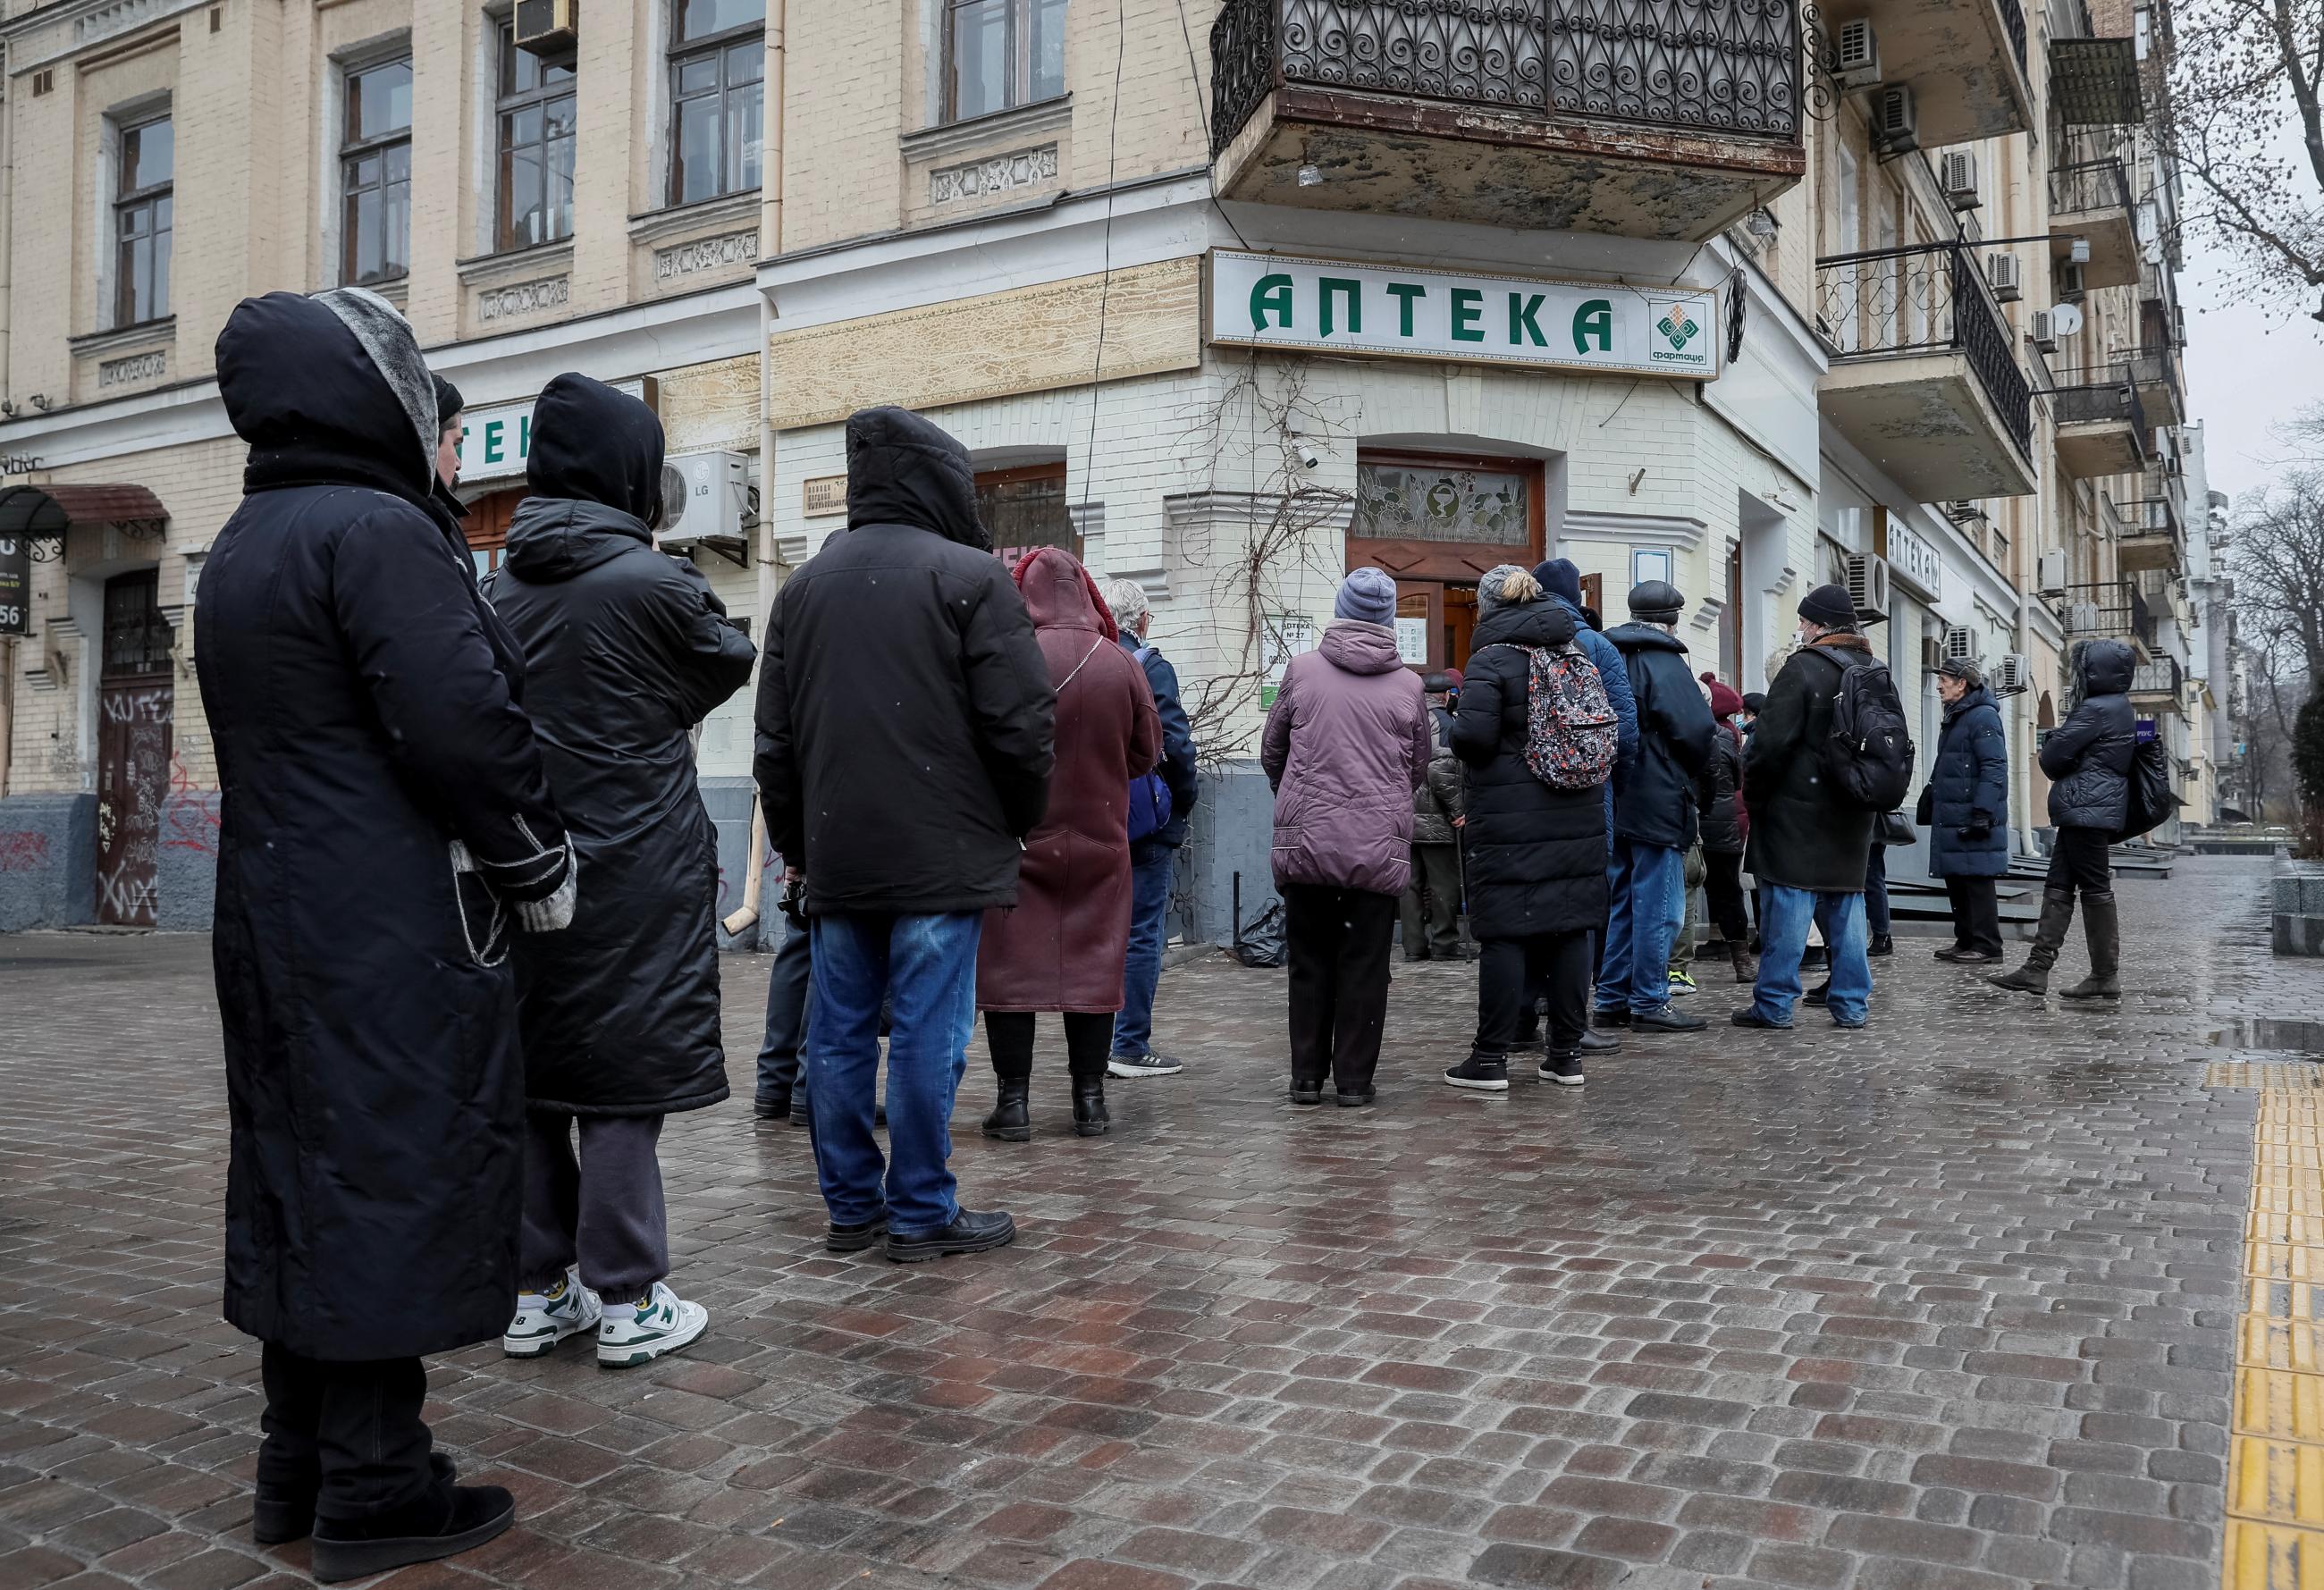 People in dark-colored winter coats line up in front of a pharmacy on a rainy spring day in Kyiv, following Russia's escalation of its war in Ukraine.